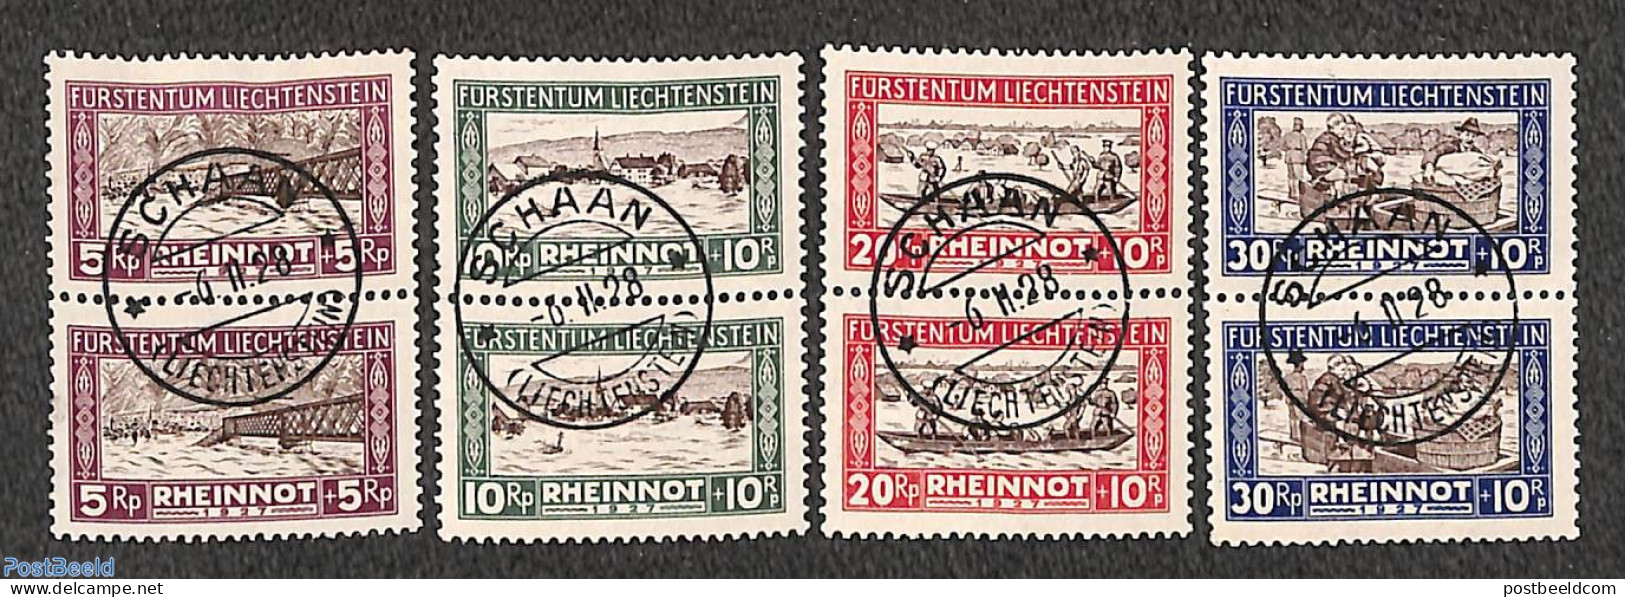 Liechtenstein 1928 Flooding Fund 4v, Pairs CTO, Used Stamps, History - Transport - Ships And Boats - Art - Bridges And.. - Gebruikt